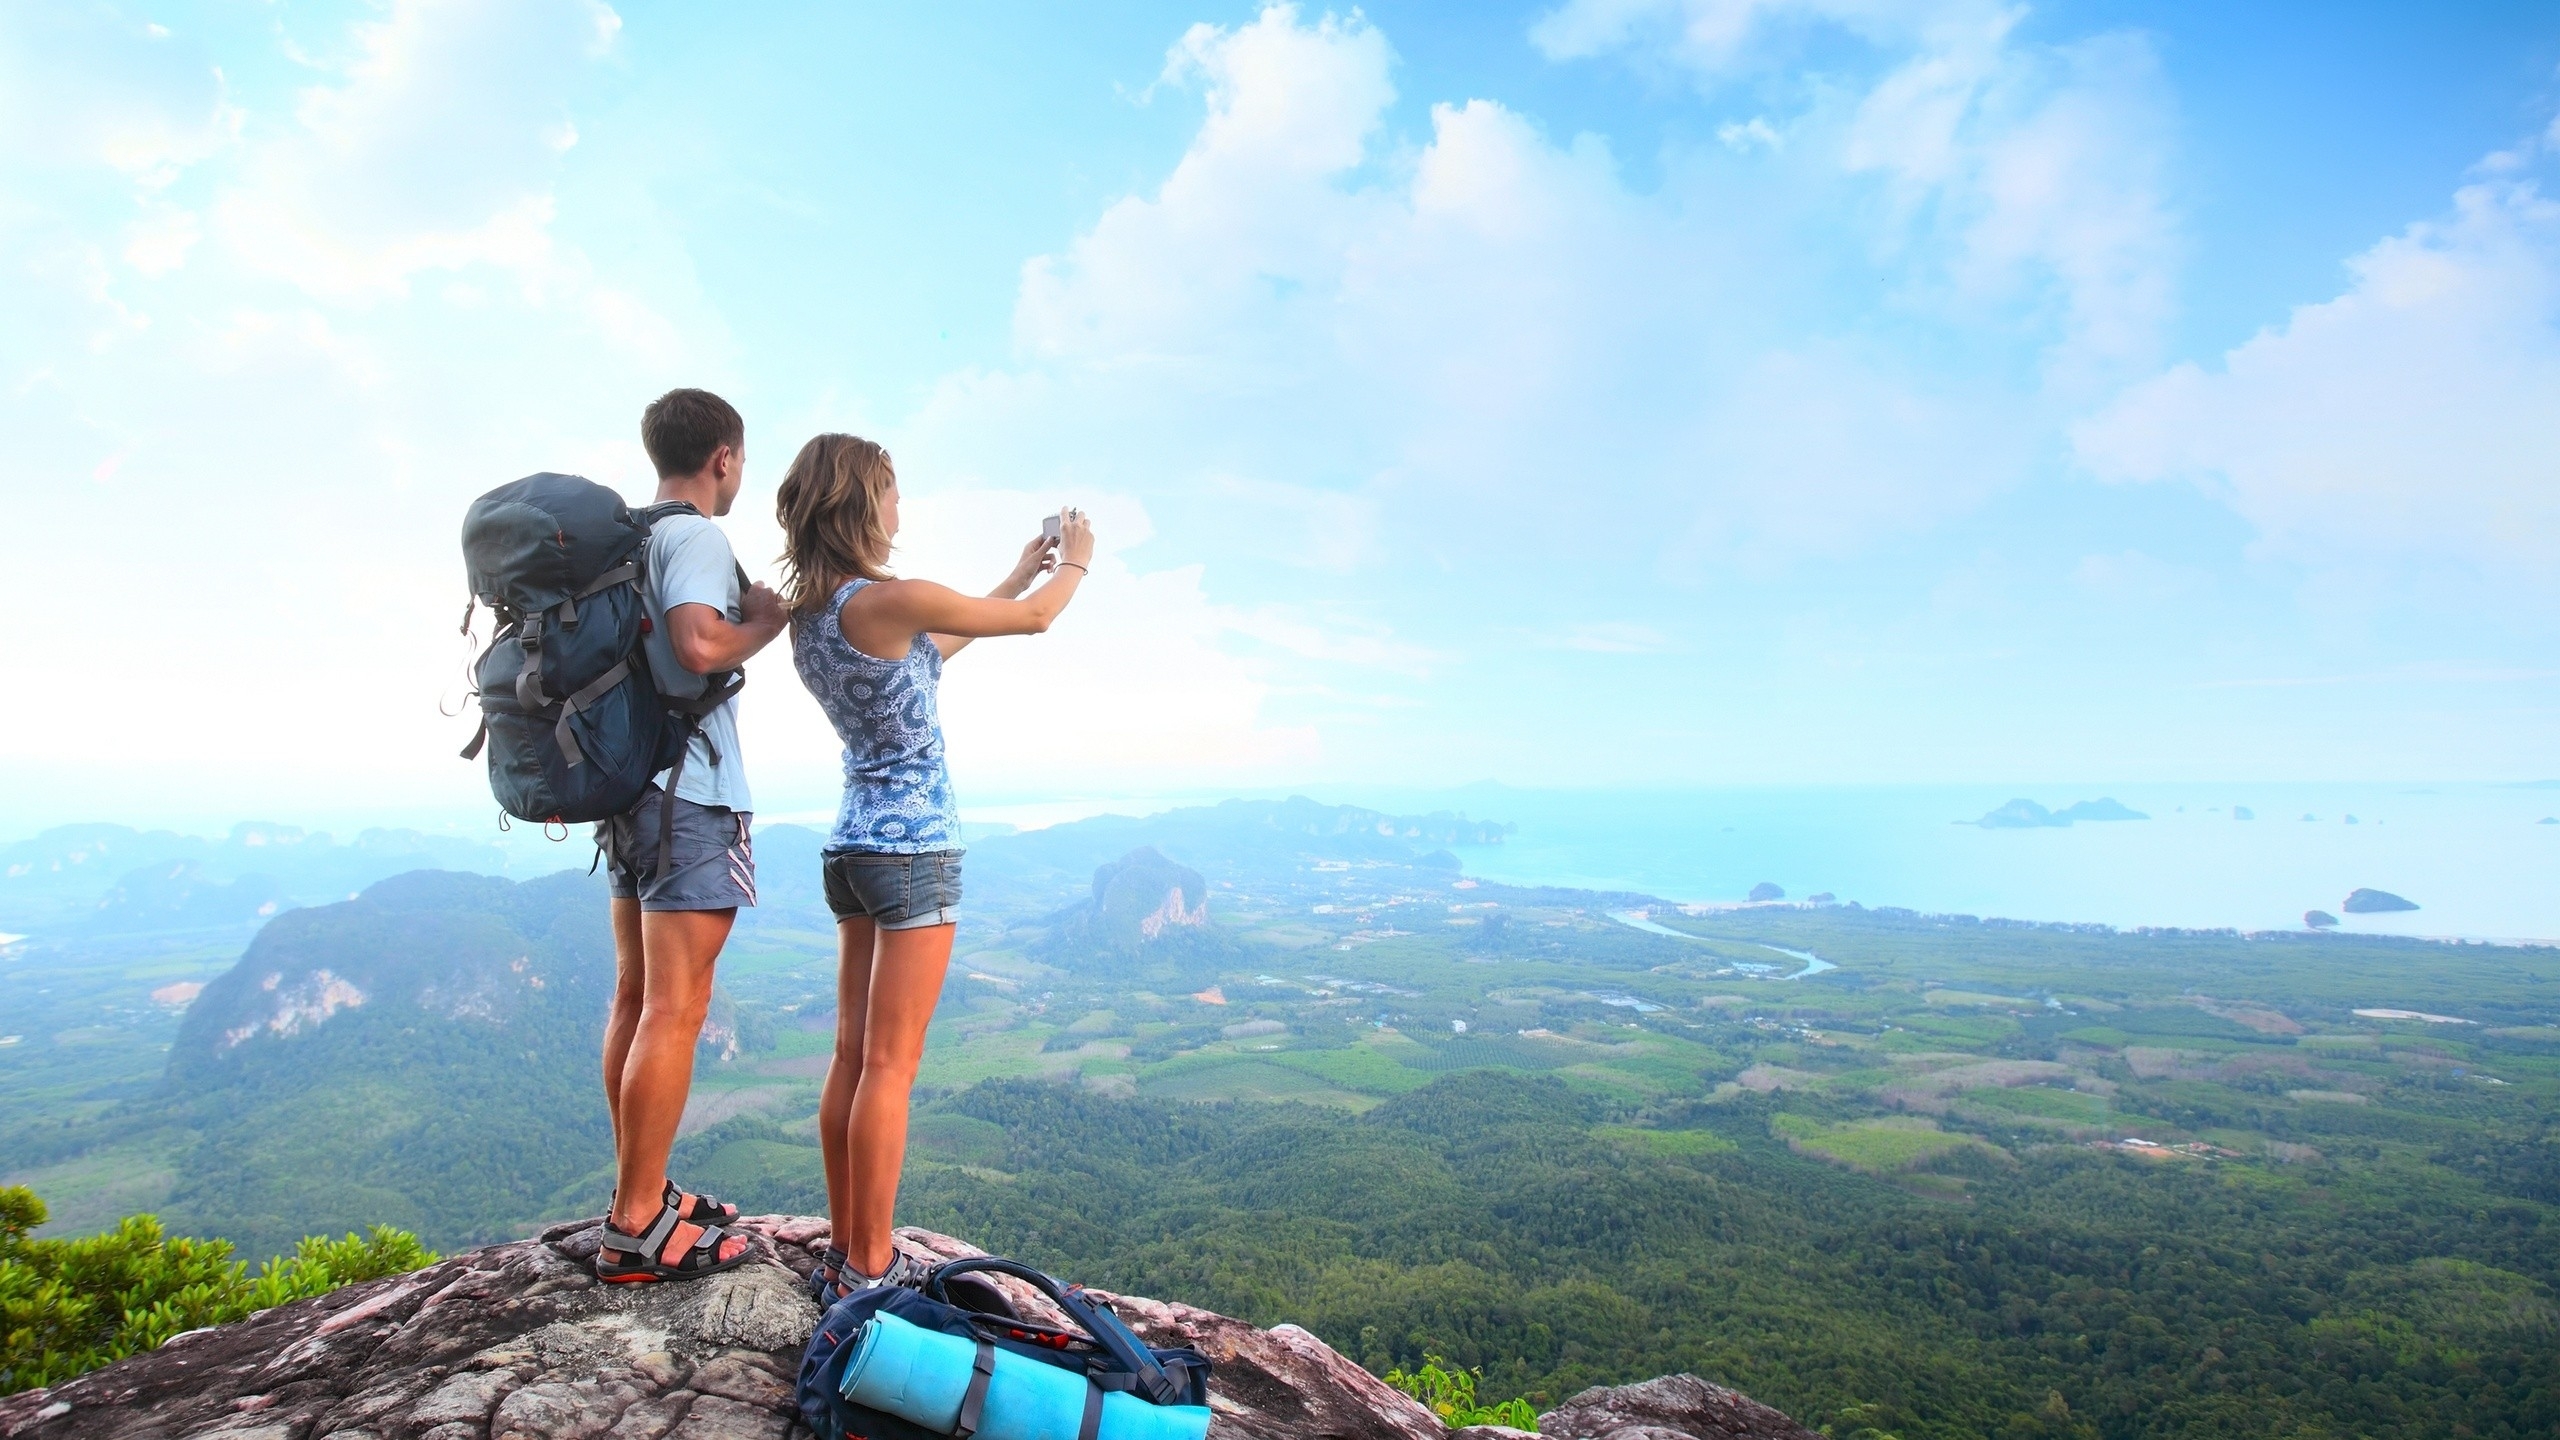 Connected travel: the mobile, digital, all-knowing travel agent